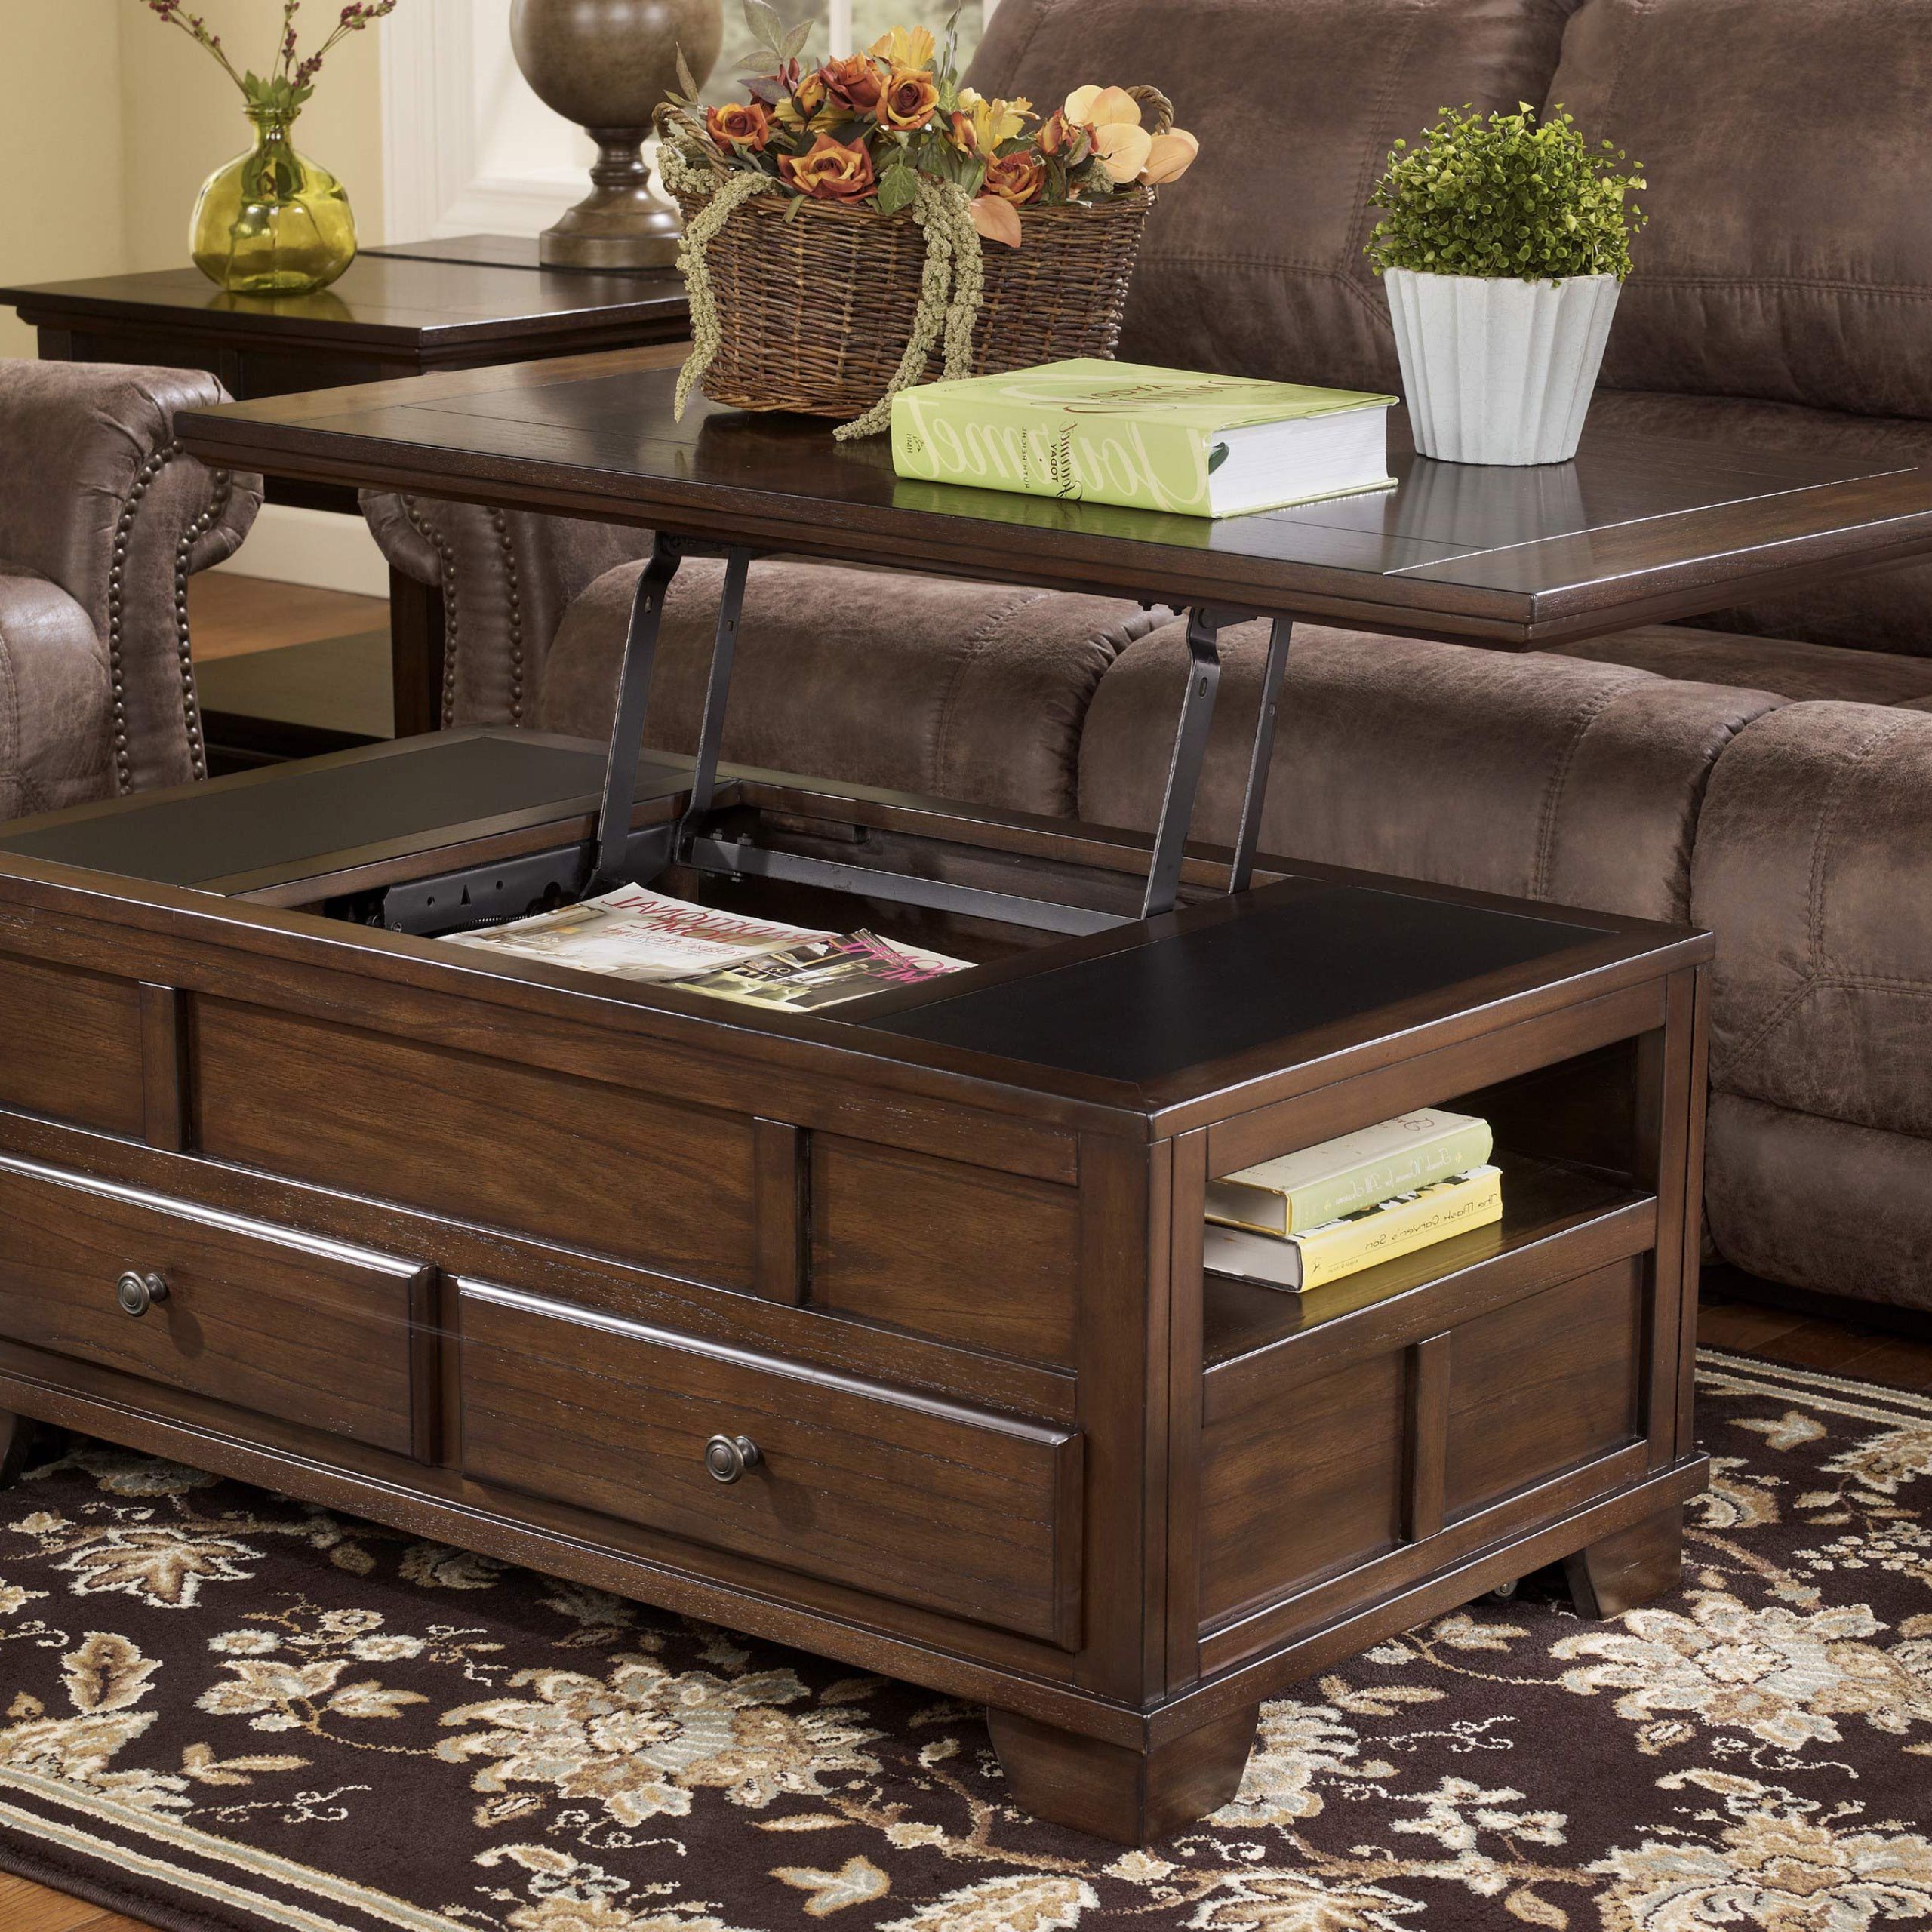 Lift Top Coffee Tables With Storage Pertaining To Lift Top Coffee Tables With Storage (View 5 of 20)